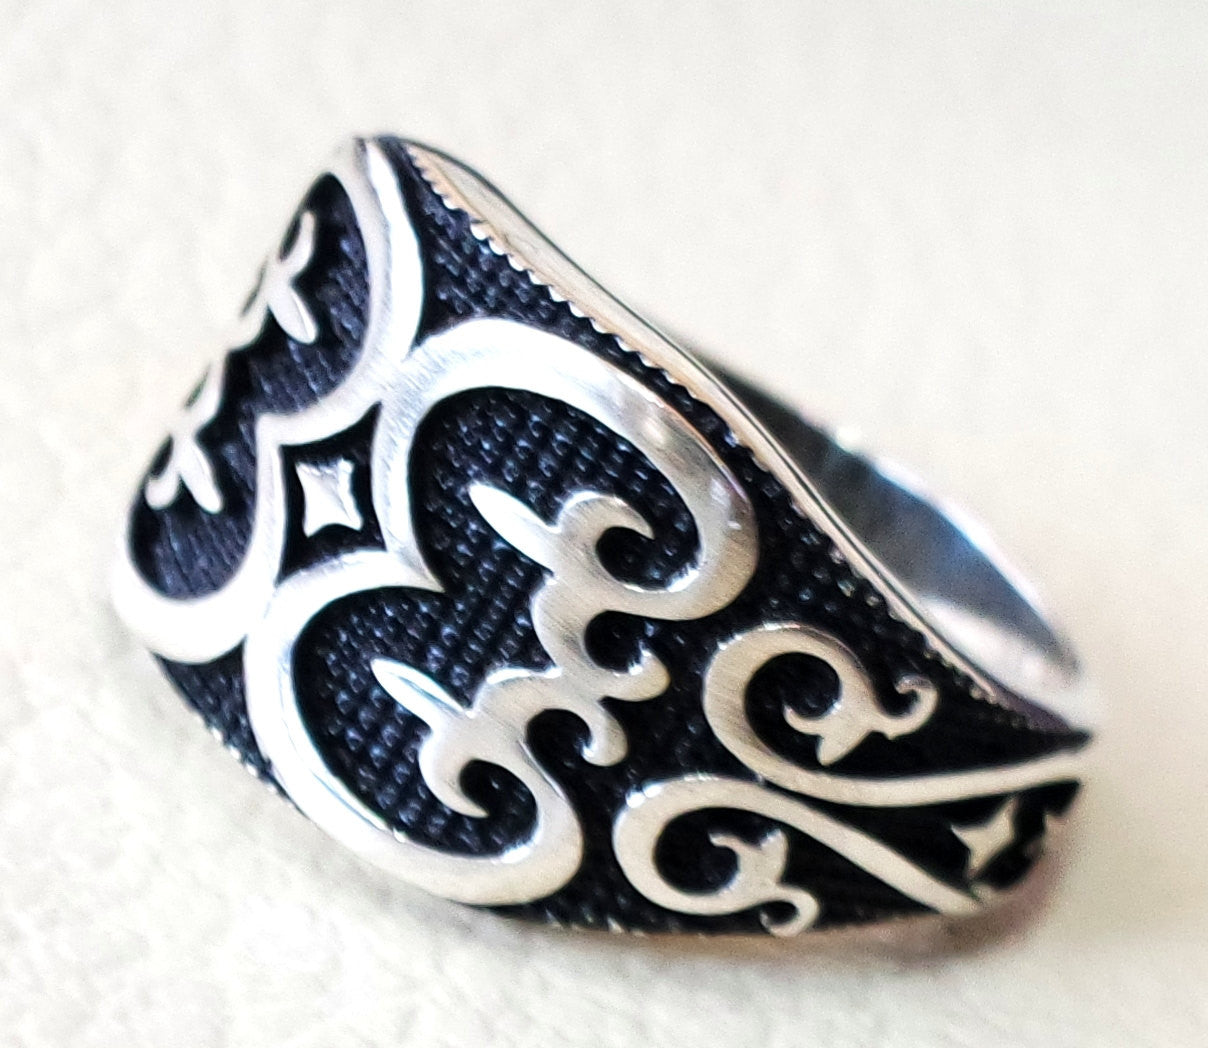 Fluer de lis celtic style heavy sterling silver 925 heavy man heavy symbol ring shape any size antique style high quality jewelry